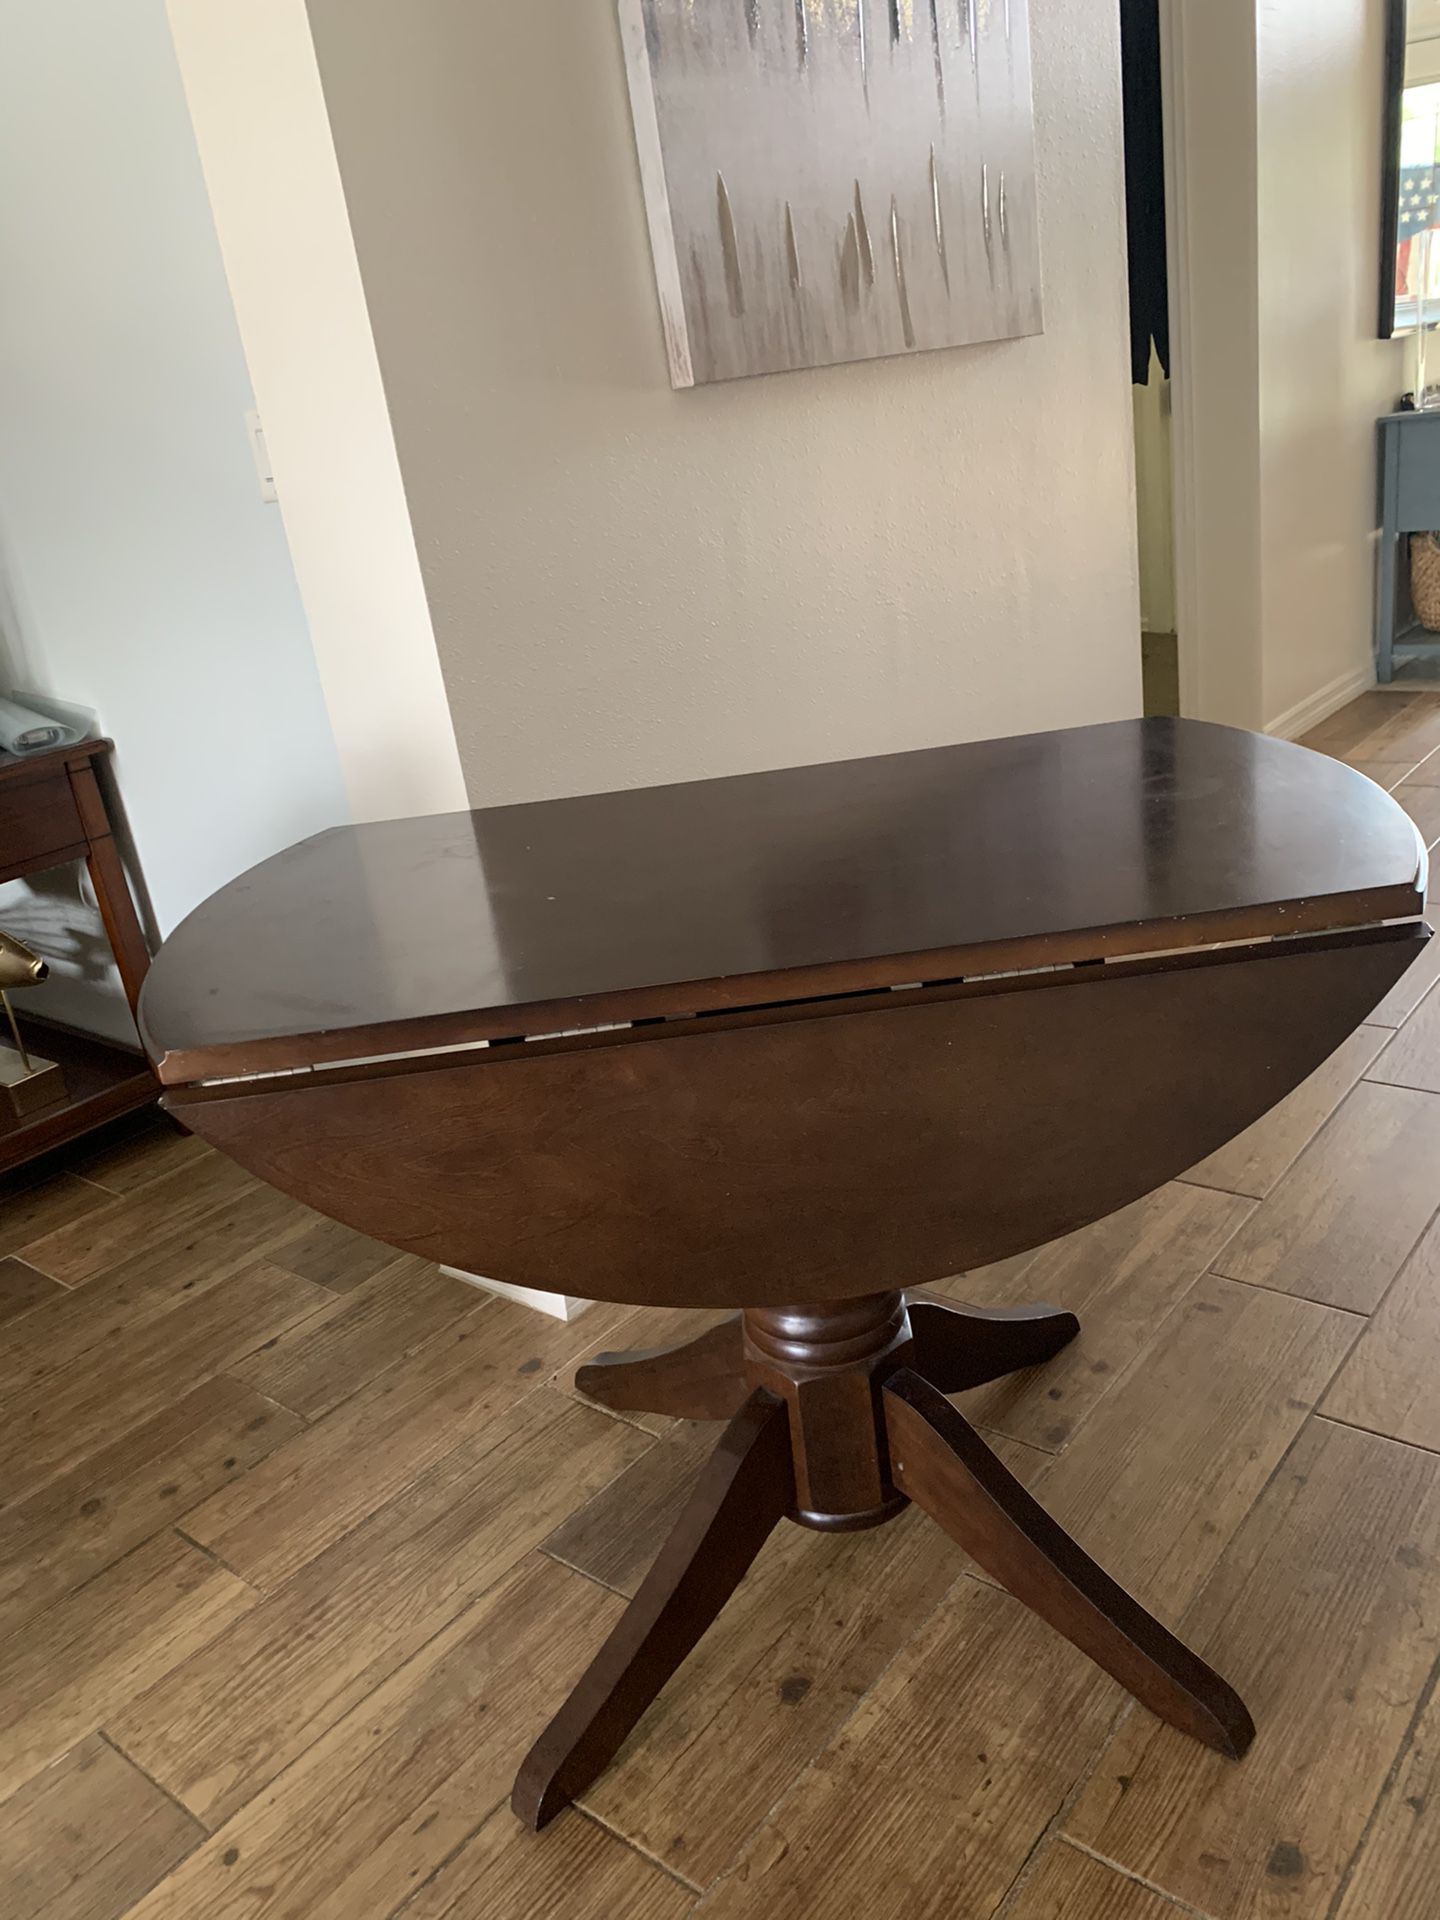 Drop leaf dining/ kitchen table